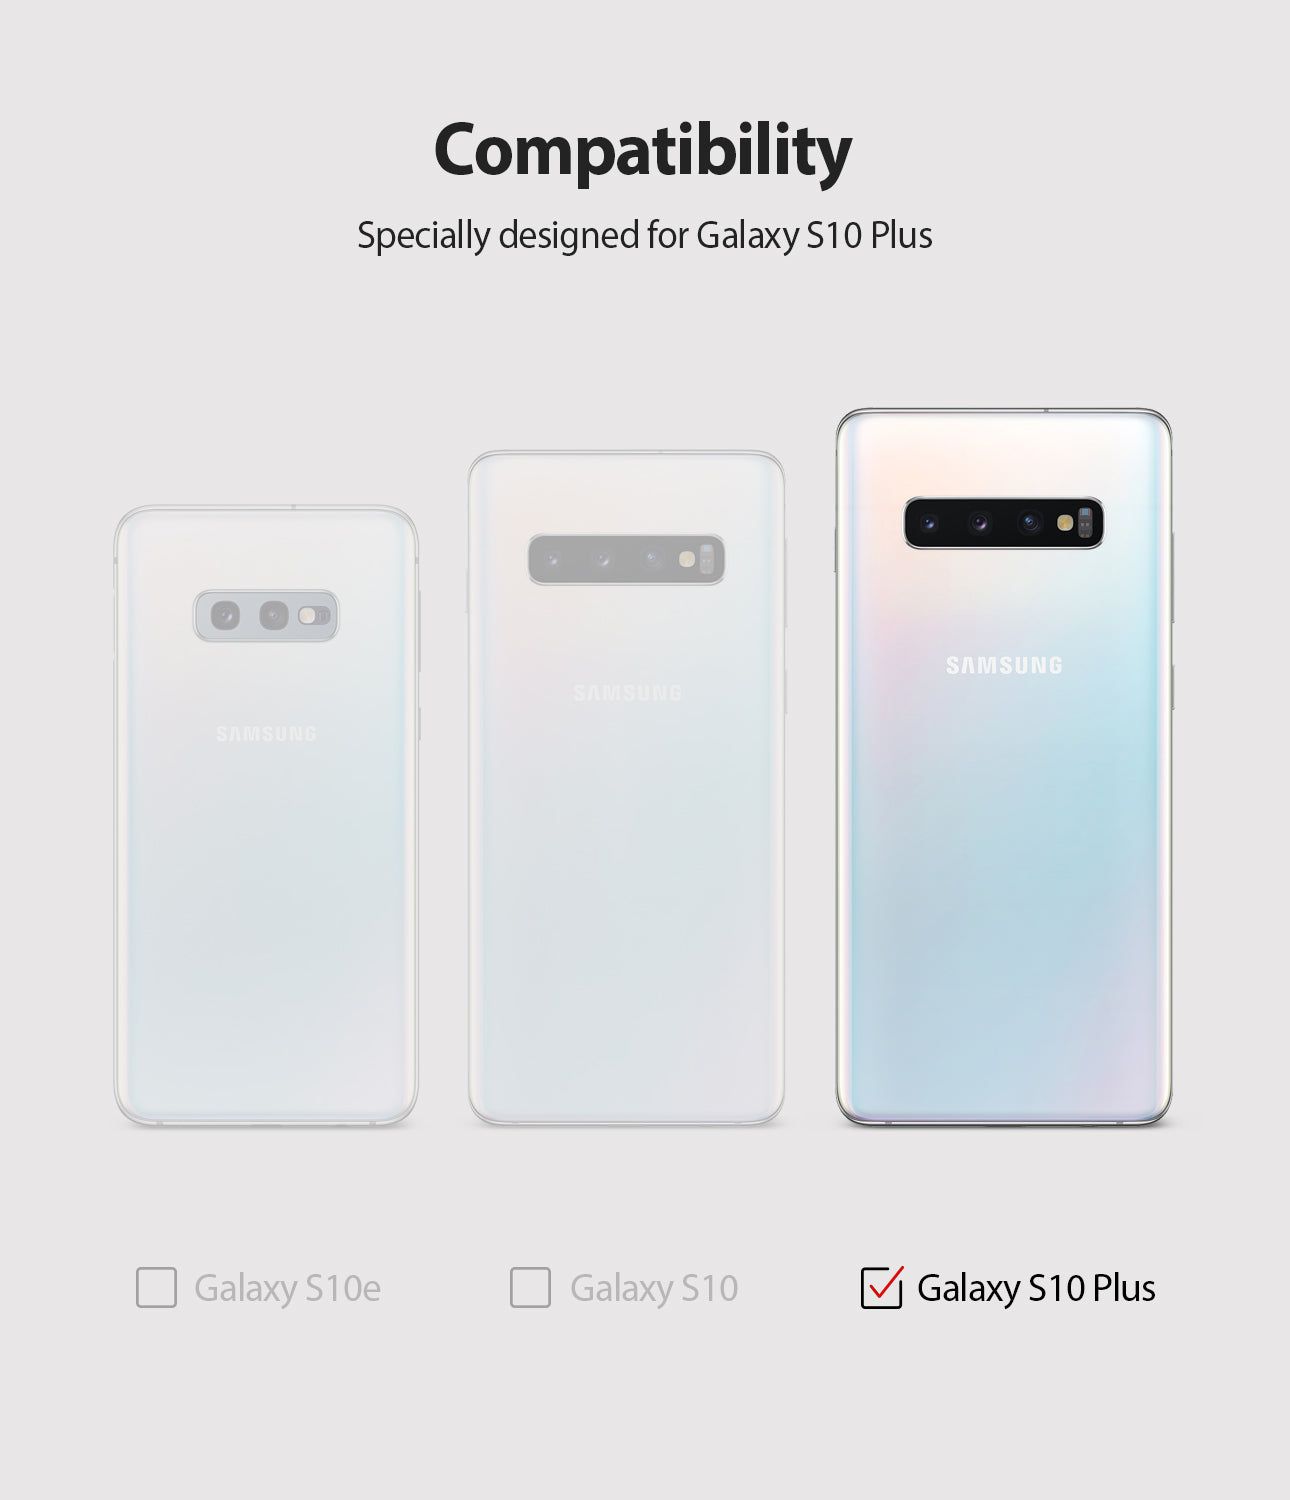 only compatible with galaxy s10 plus